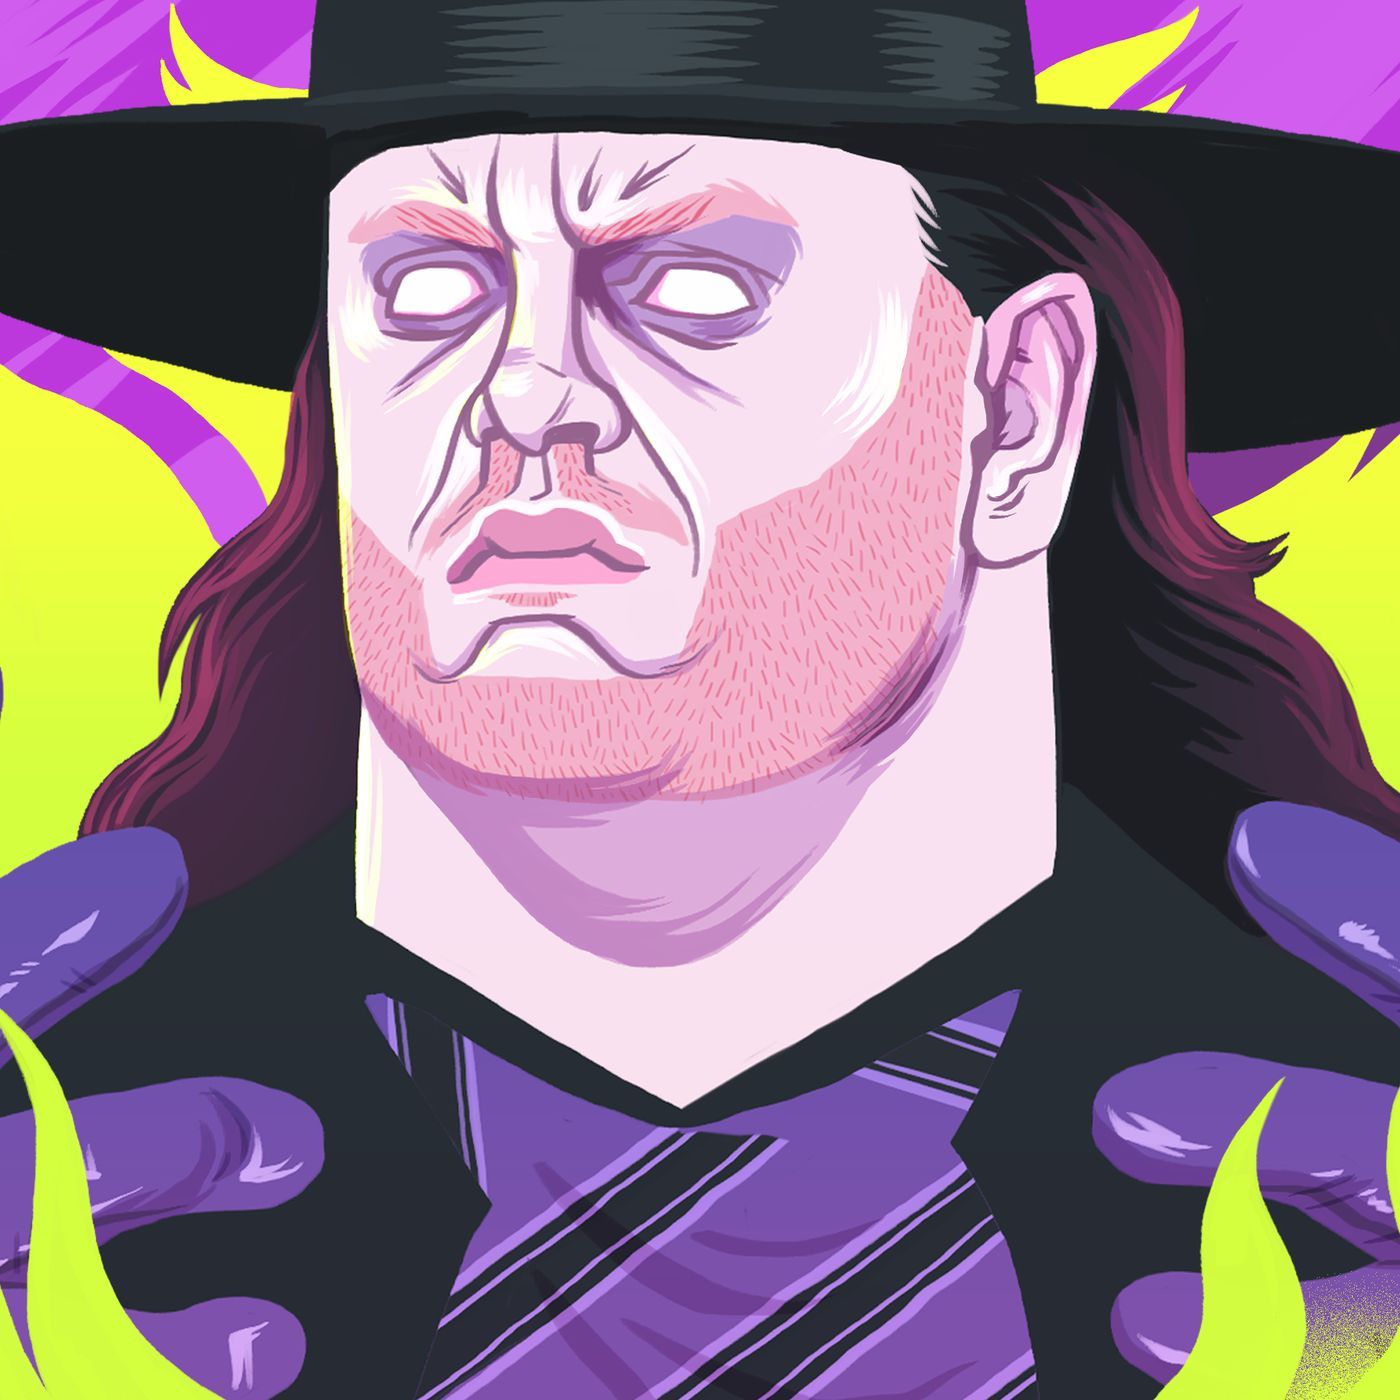 Dead Man Rising: The Making of the Undertaker